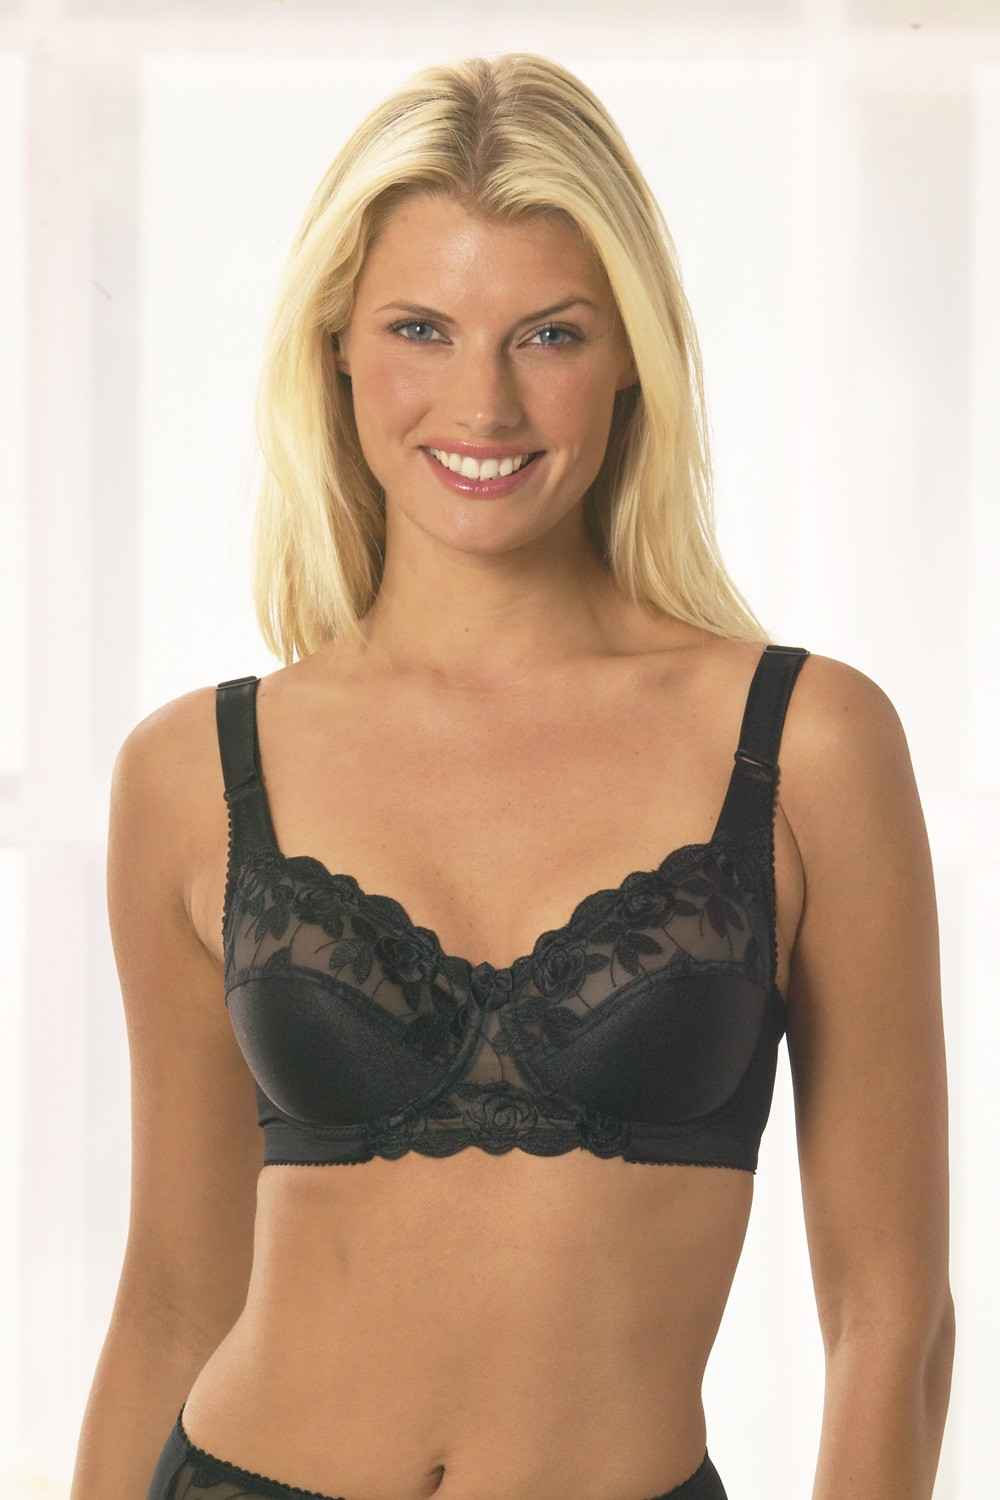 Cotton Delight underwired bra with broderie anglaise